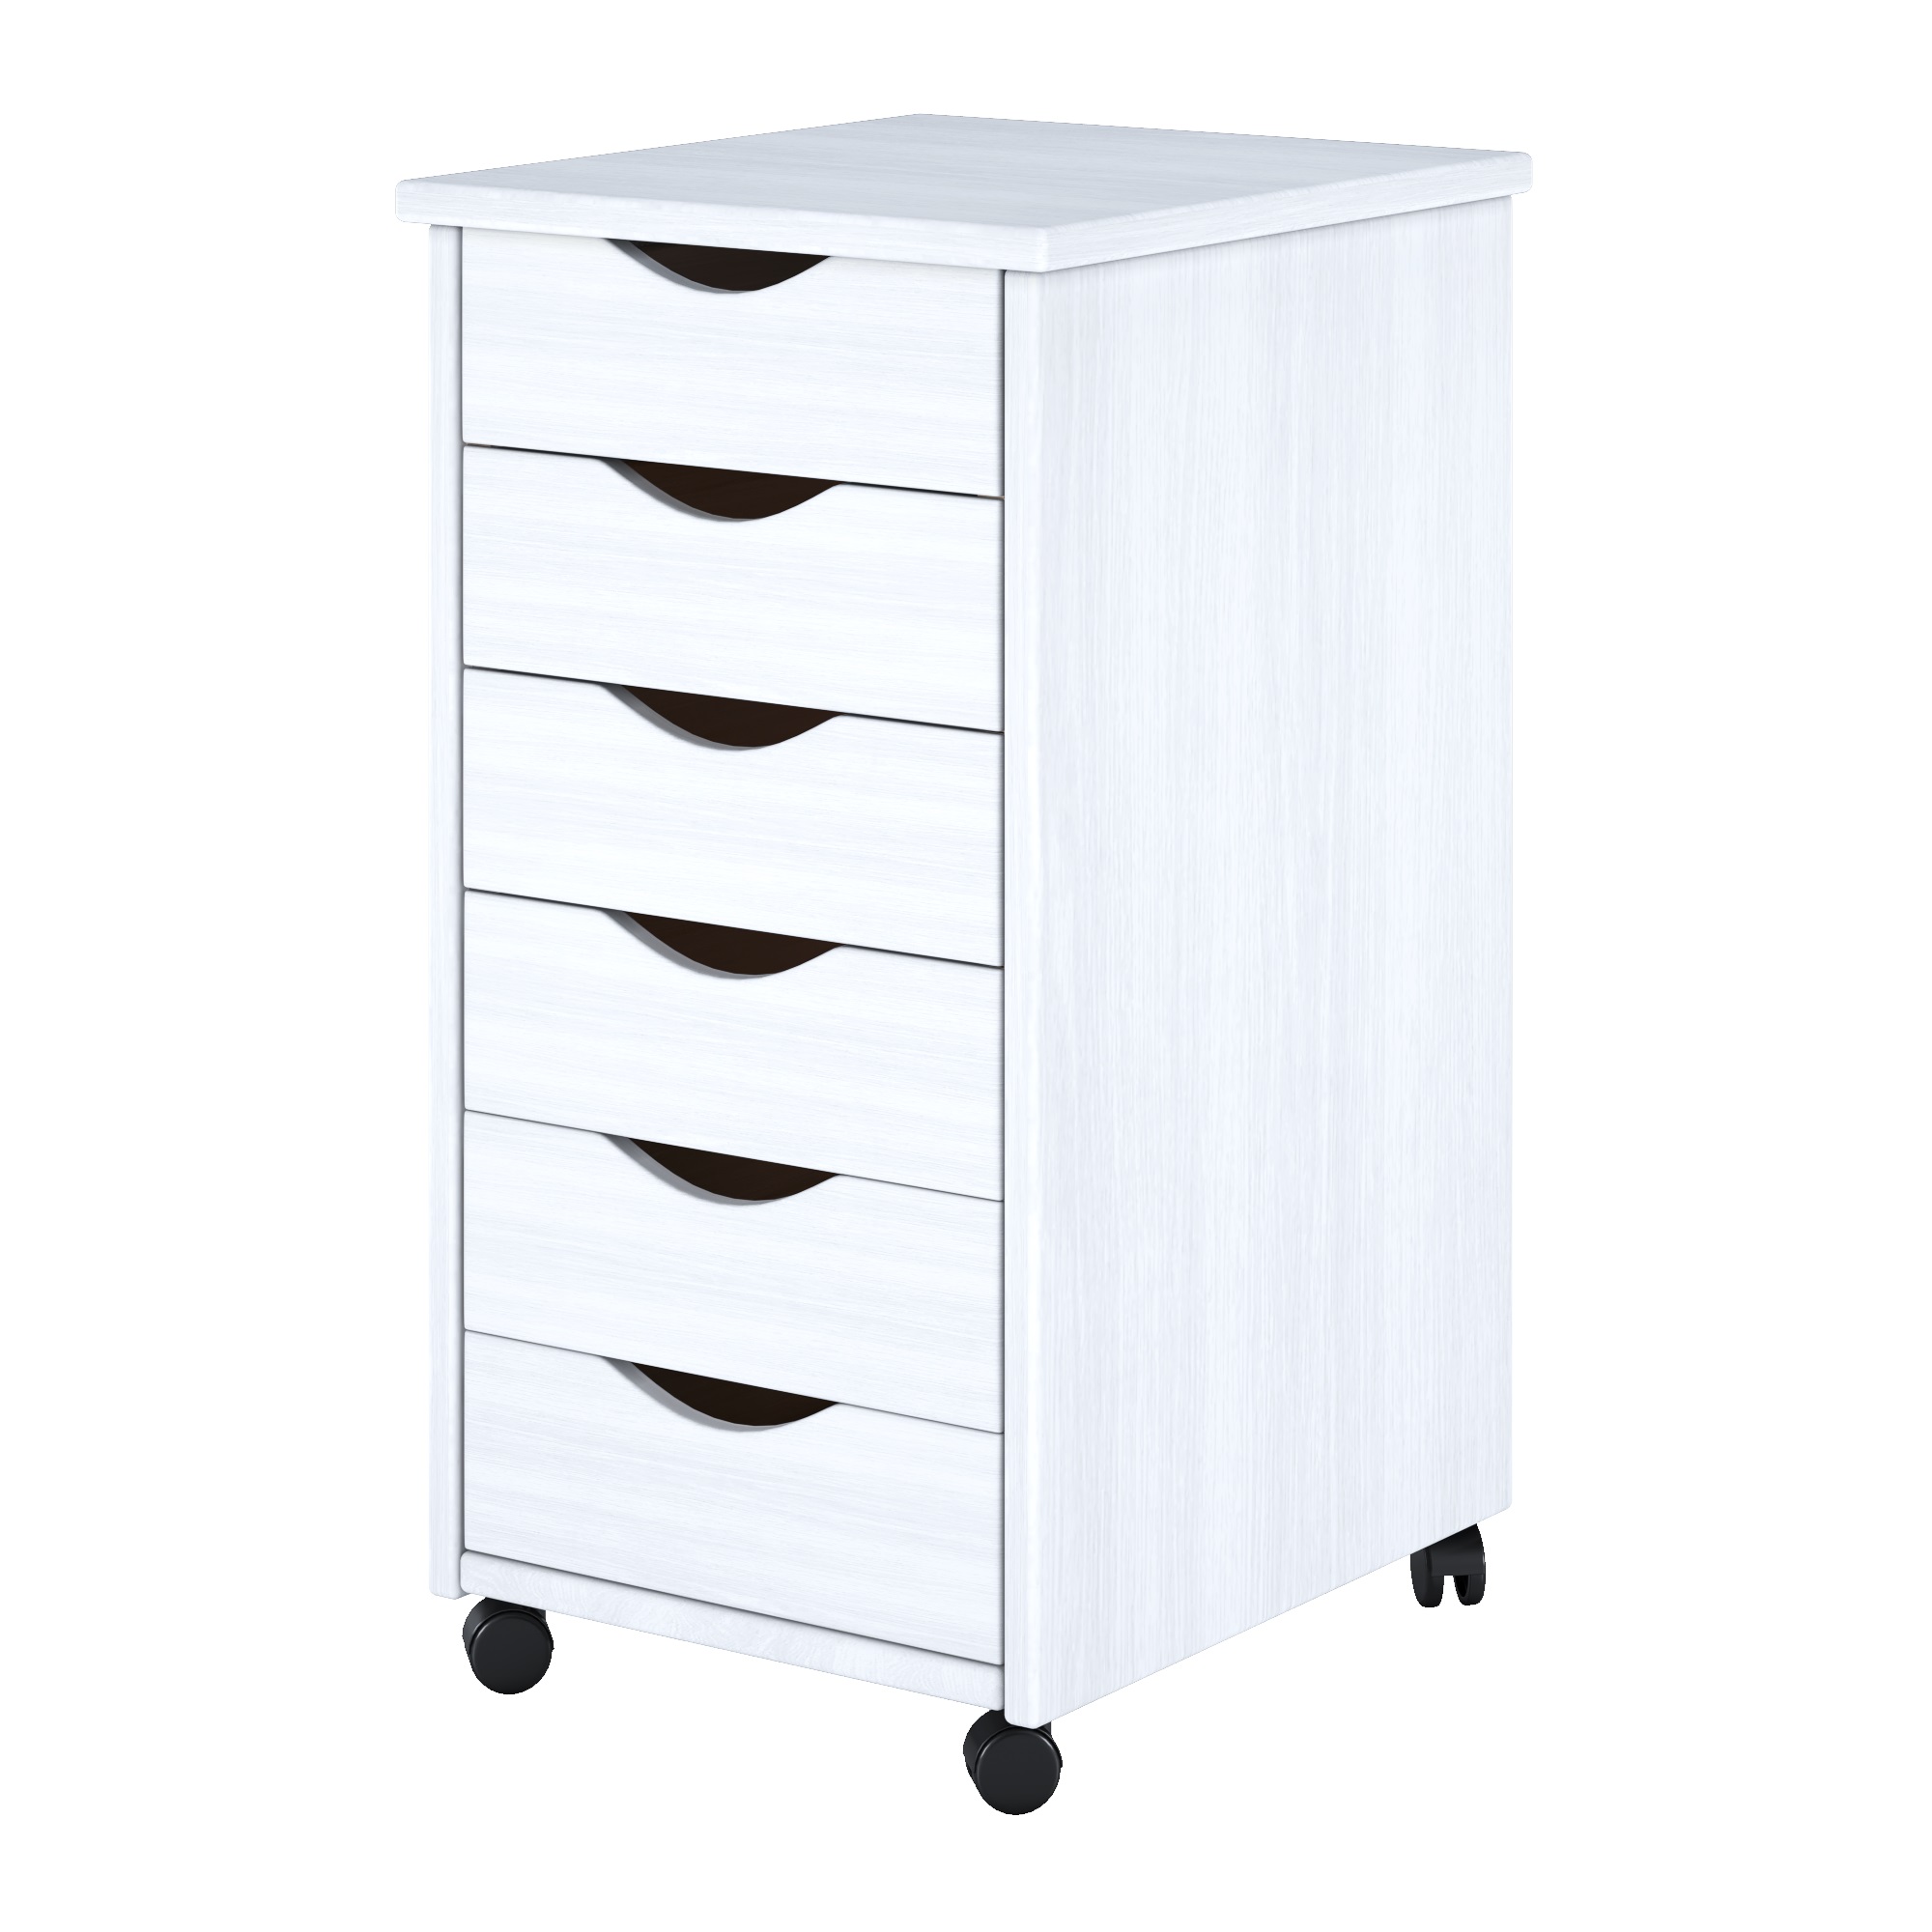 Adeptus Original Roll Cart, Solid Wood, 6 Drawer Roll Cart, White  (13.4" L x 15.4" W x 25.4" H) - image 3 of 9